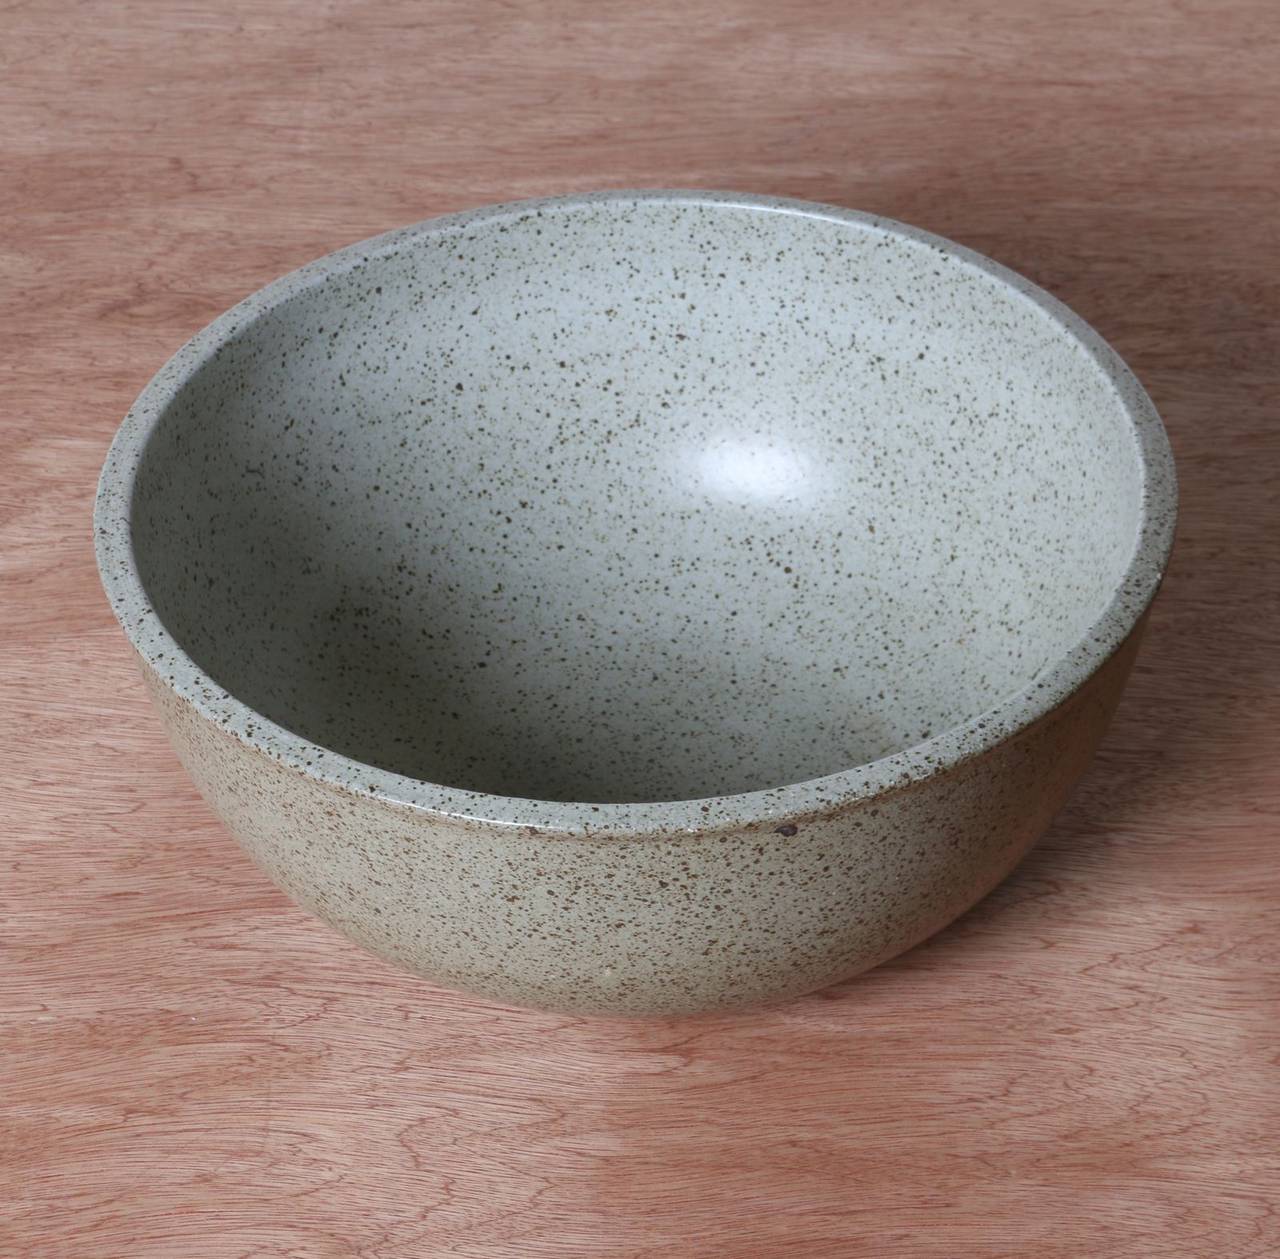 Majestic, speckled glazed stoneware bowl by David Cressey in grey and brown tones. Created for Architectural Pottery / Terra Major Gourmet-Ware in the 1970s by David Cressey, one of the leading ceramicists of the Mid-Century era. 

This ceramic